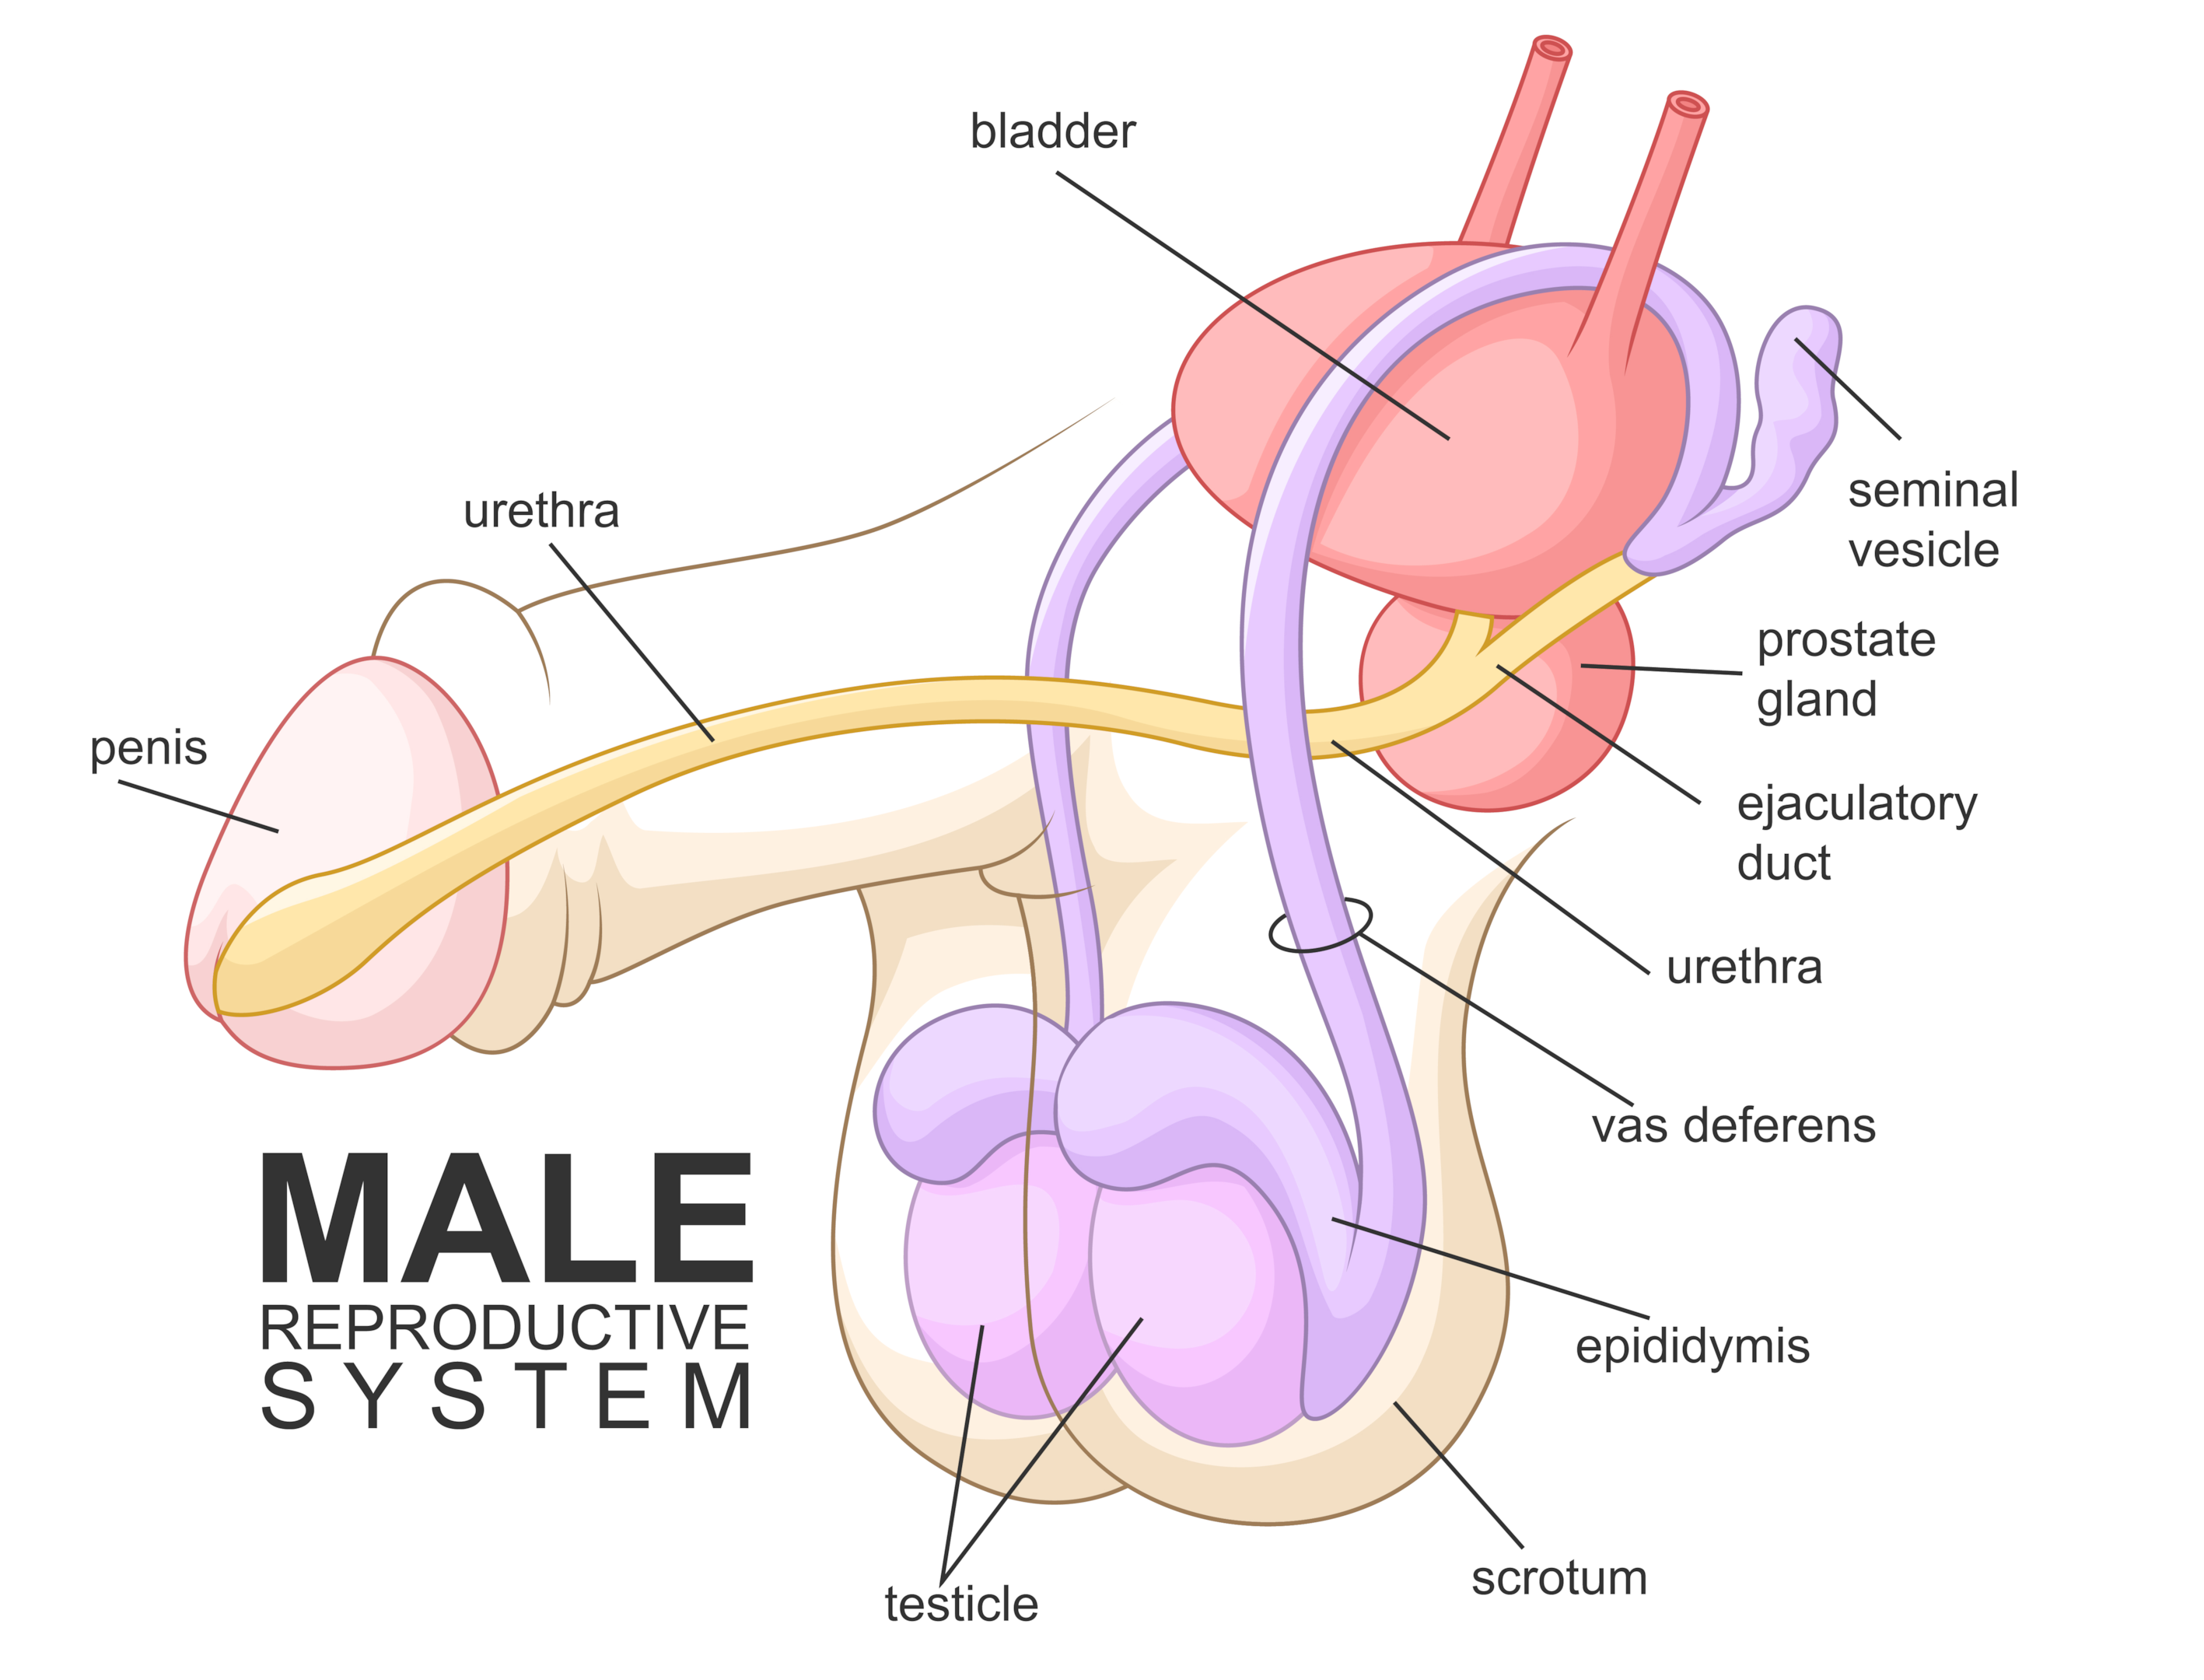 illustrates various parts of the human penis and other organs of the reproductive system.